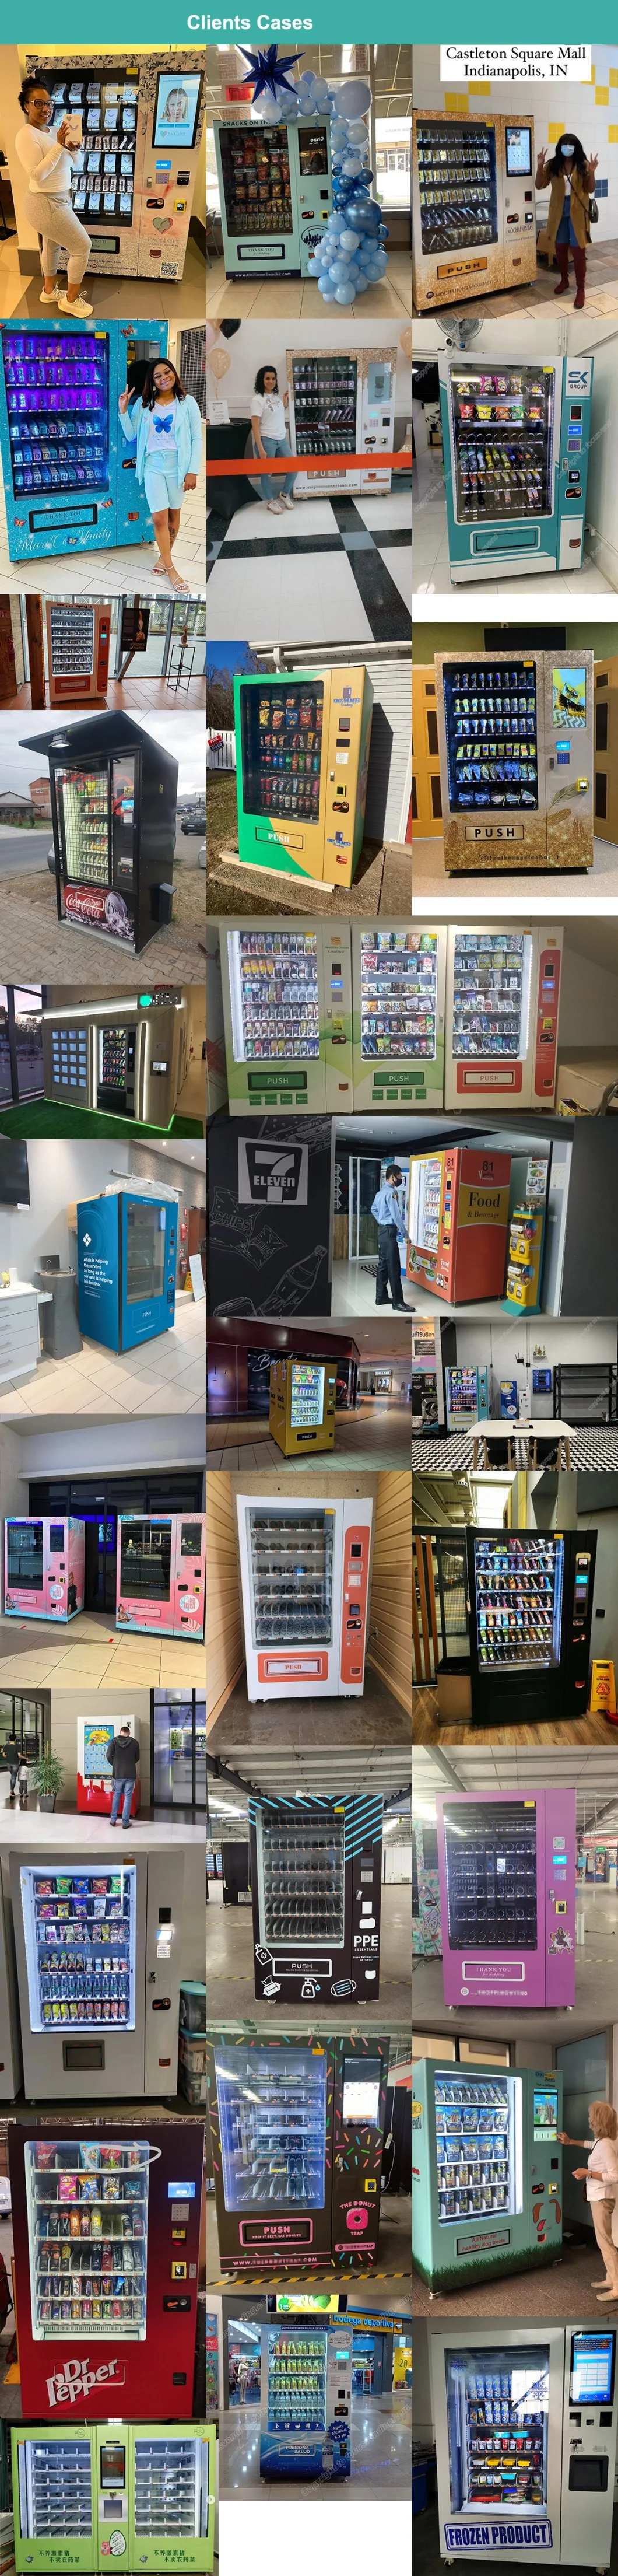 New Intelligent Full Automatic Food Vending Machine Selling Fast Food and Hot Drink for Hospital /for Mall /Office Buildings